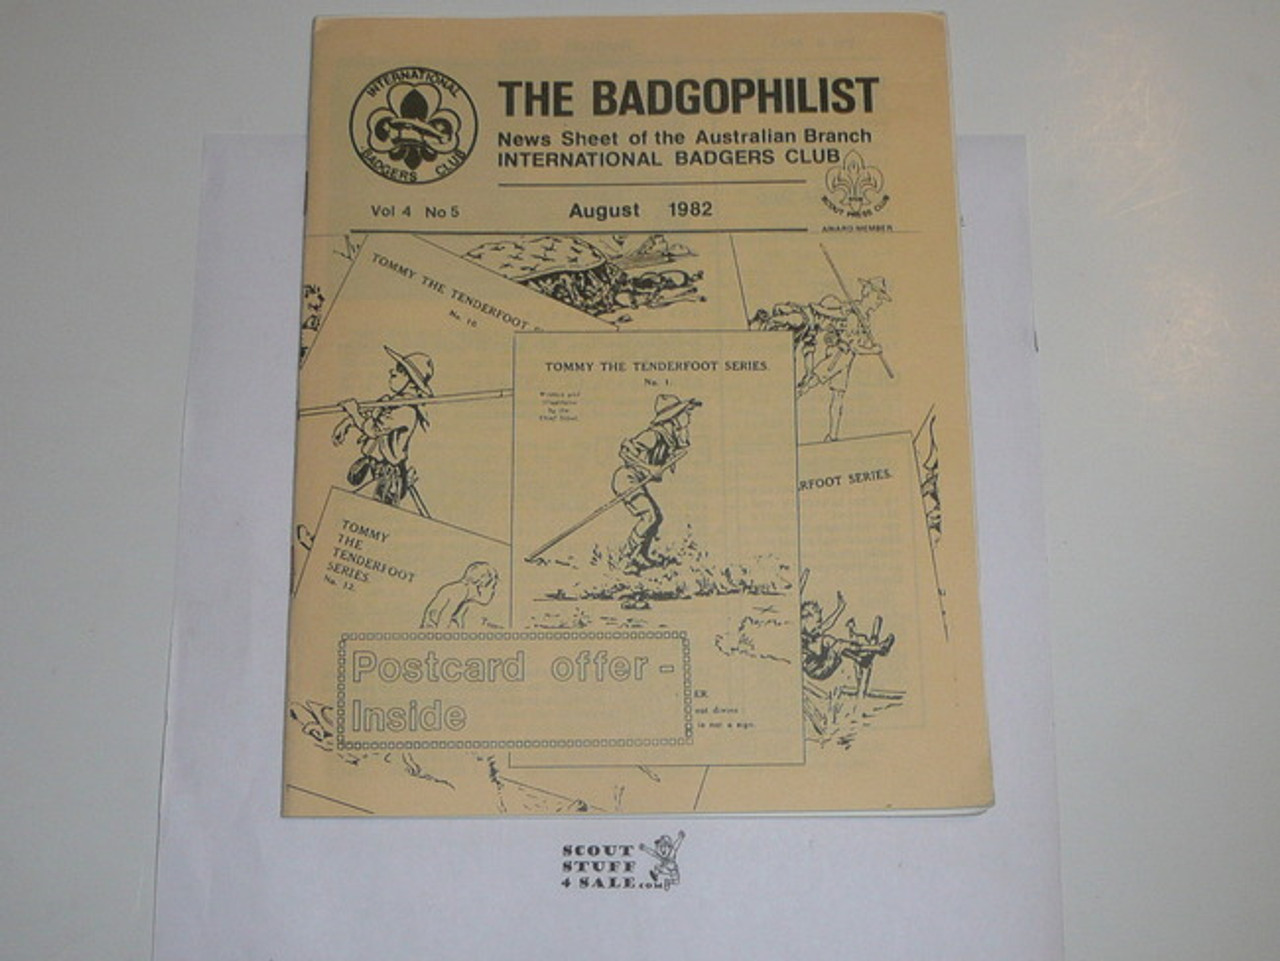 The Badgophilist, Newsletter of the Australian Branch of the International Badger clubb, 1982 August, Vol 4 #5